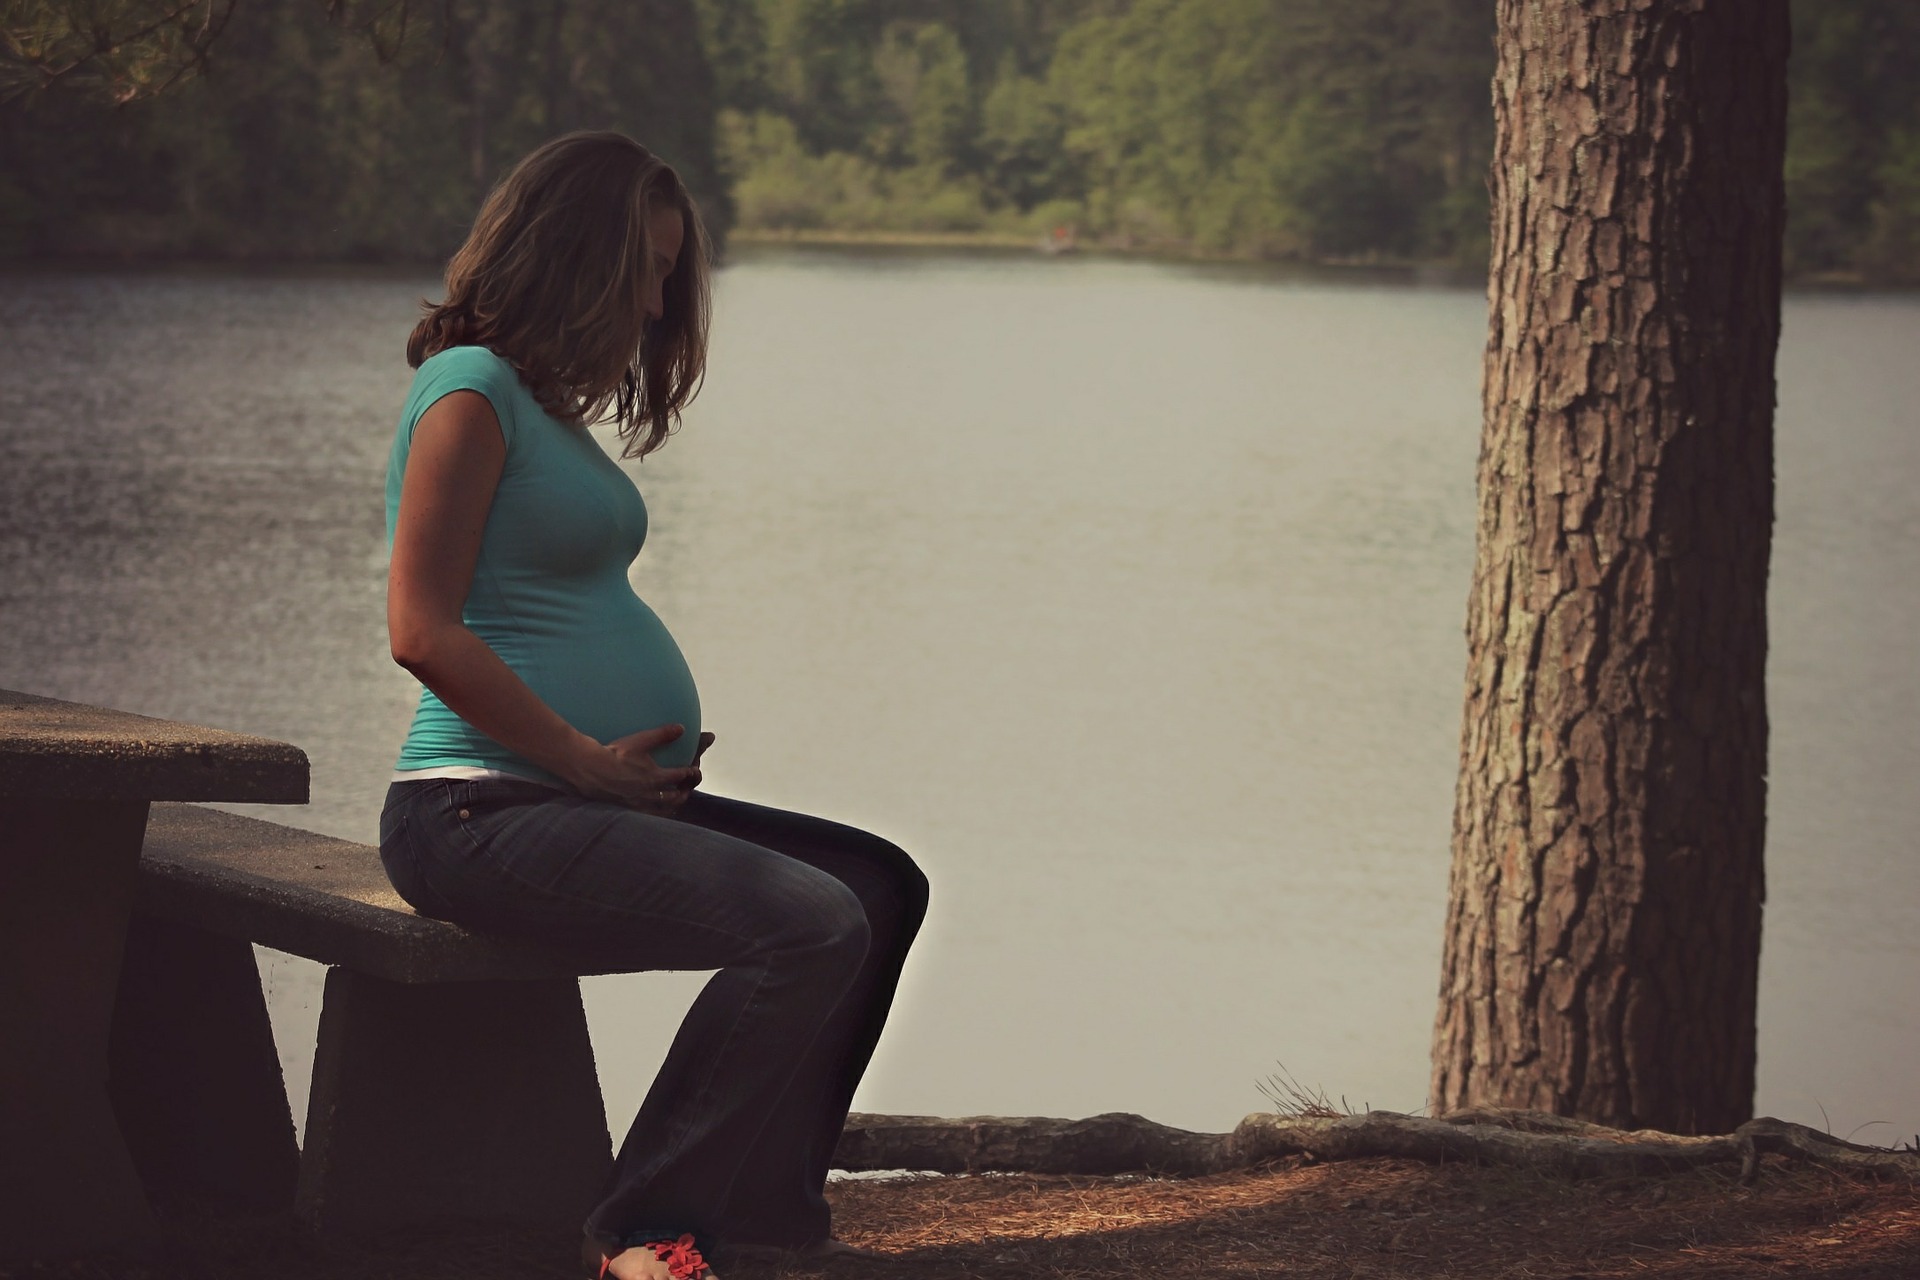 A pregnant woman of color sits at a bench and table, looking down. Behind her, there is a lake and a tree trunk.